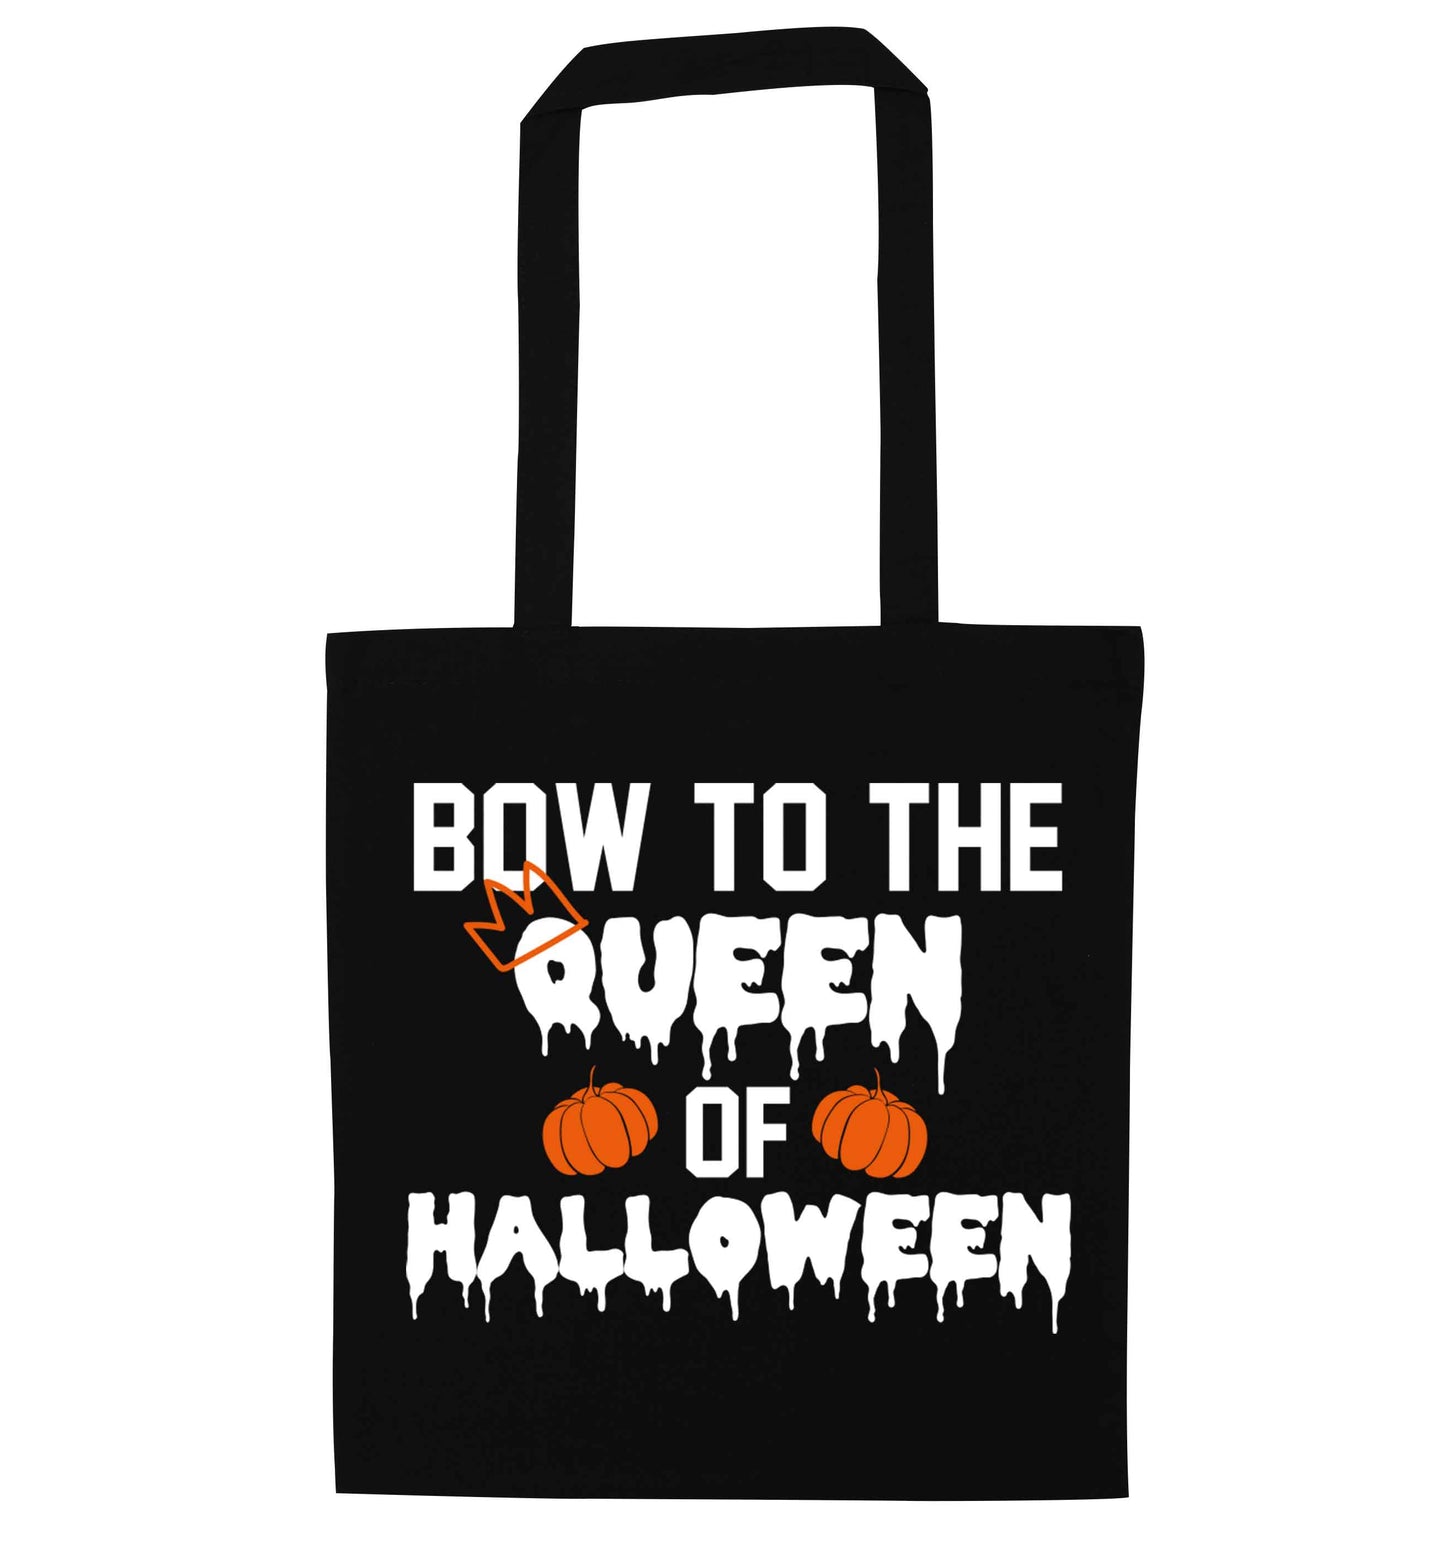 Bow to the Queen of halloween black tote bag